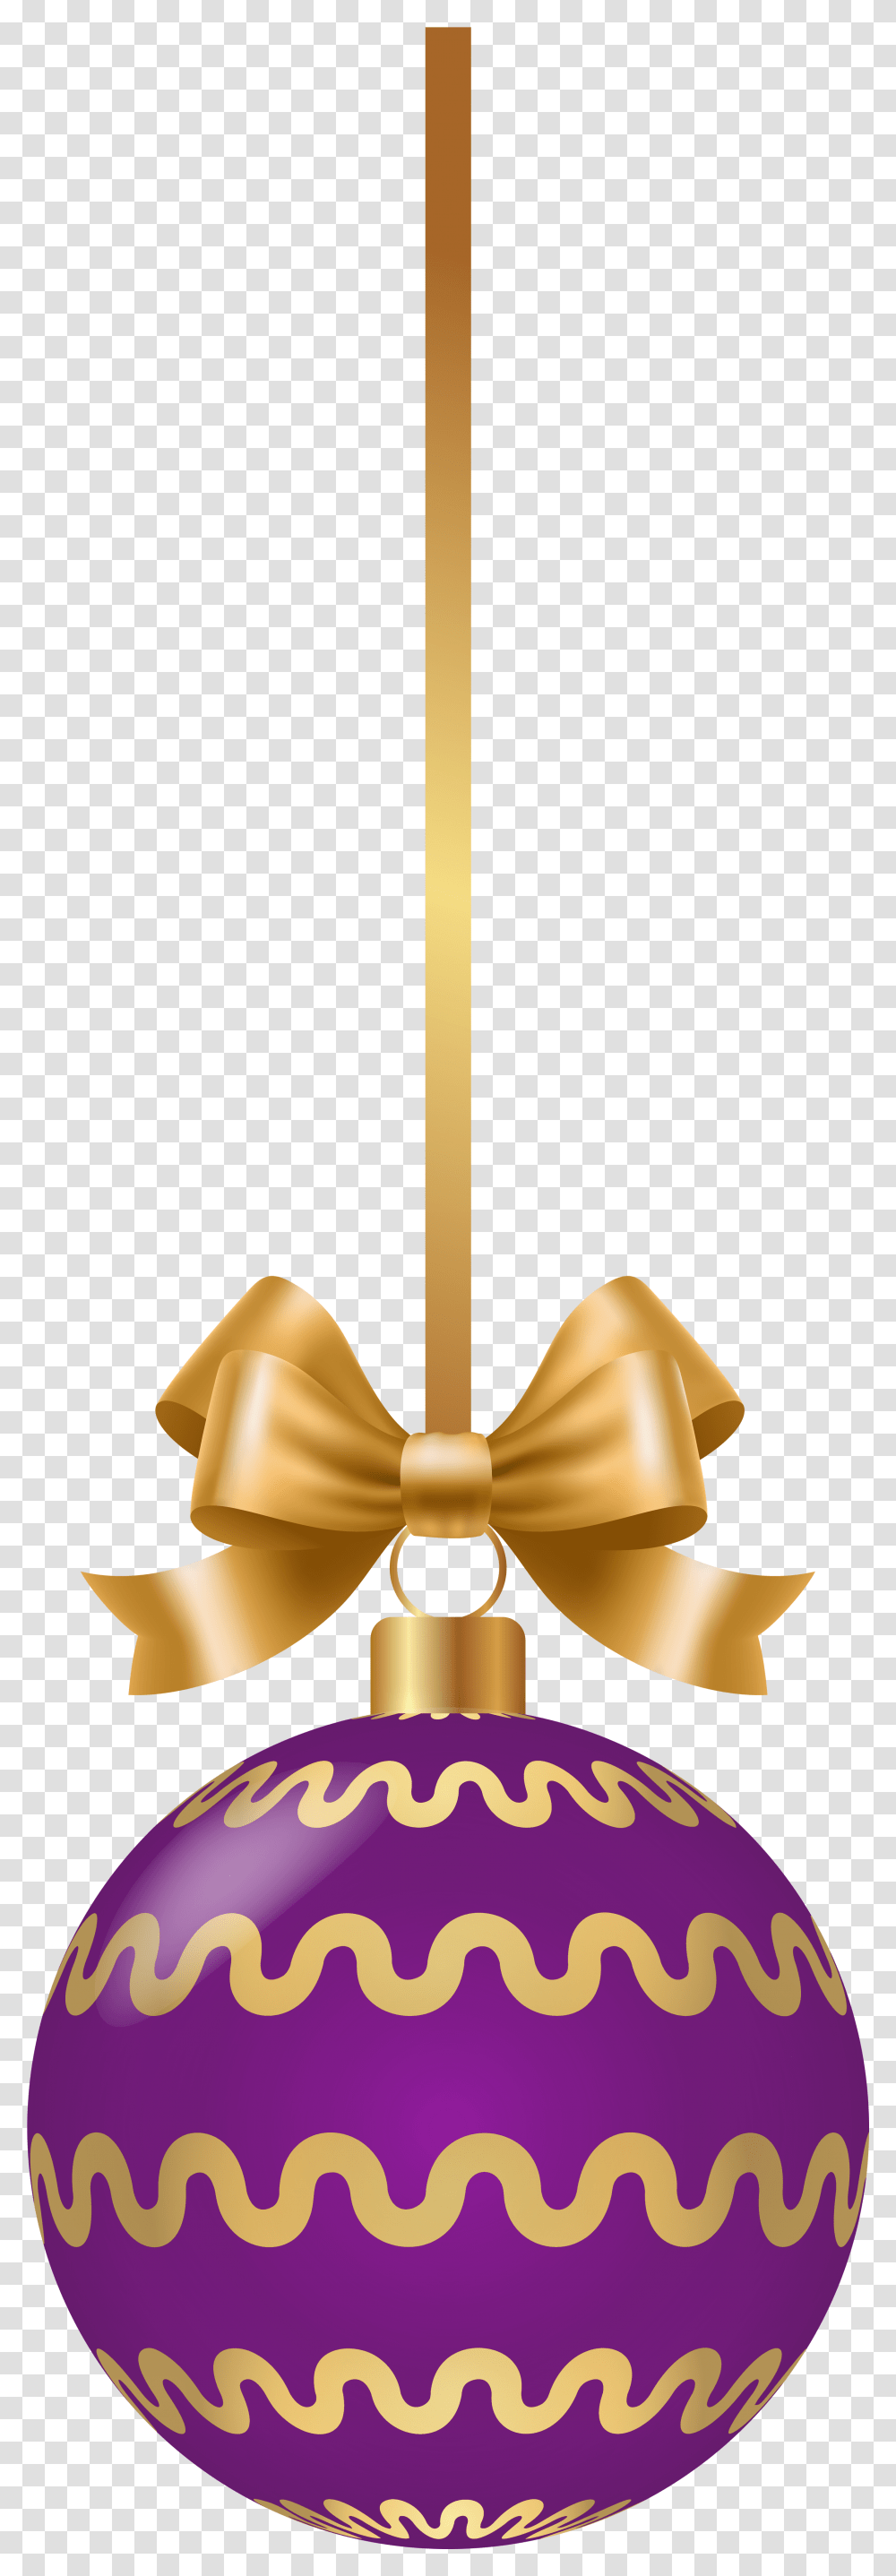 Purple Christmas Ball Clip Art Blue Gold Christmas Ball, Tie, Accessories, Accessory, Lamp Transparent Png